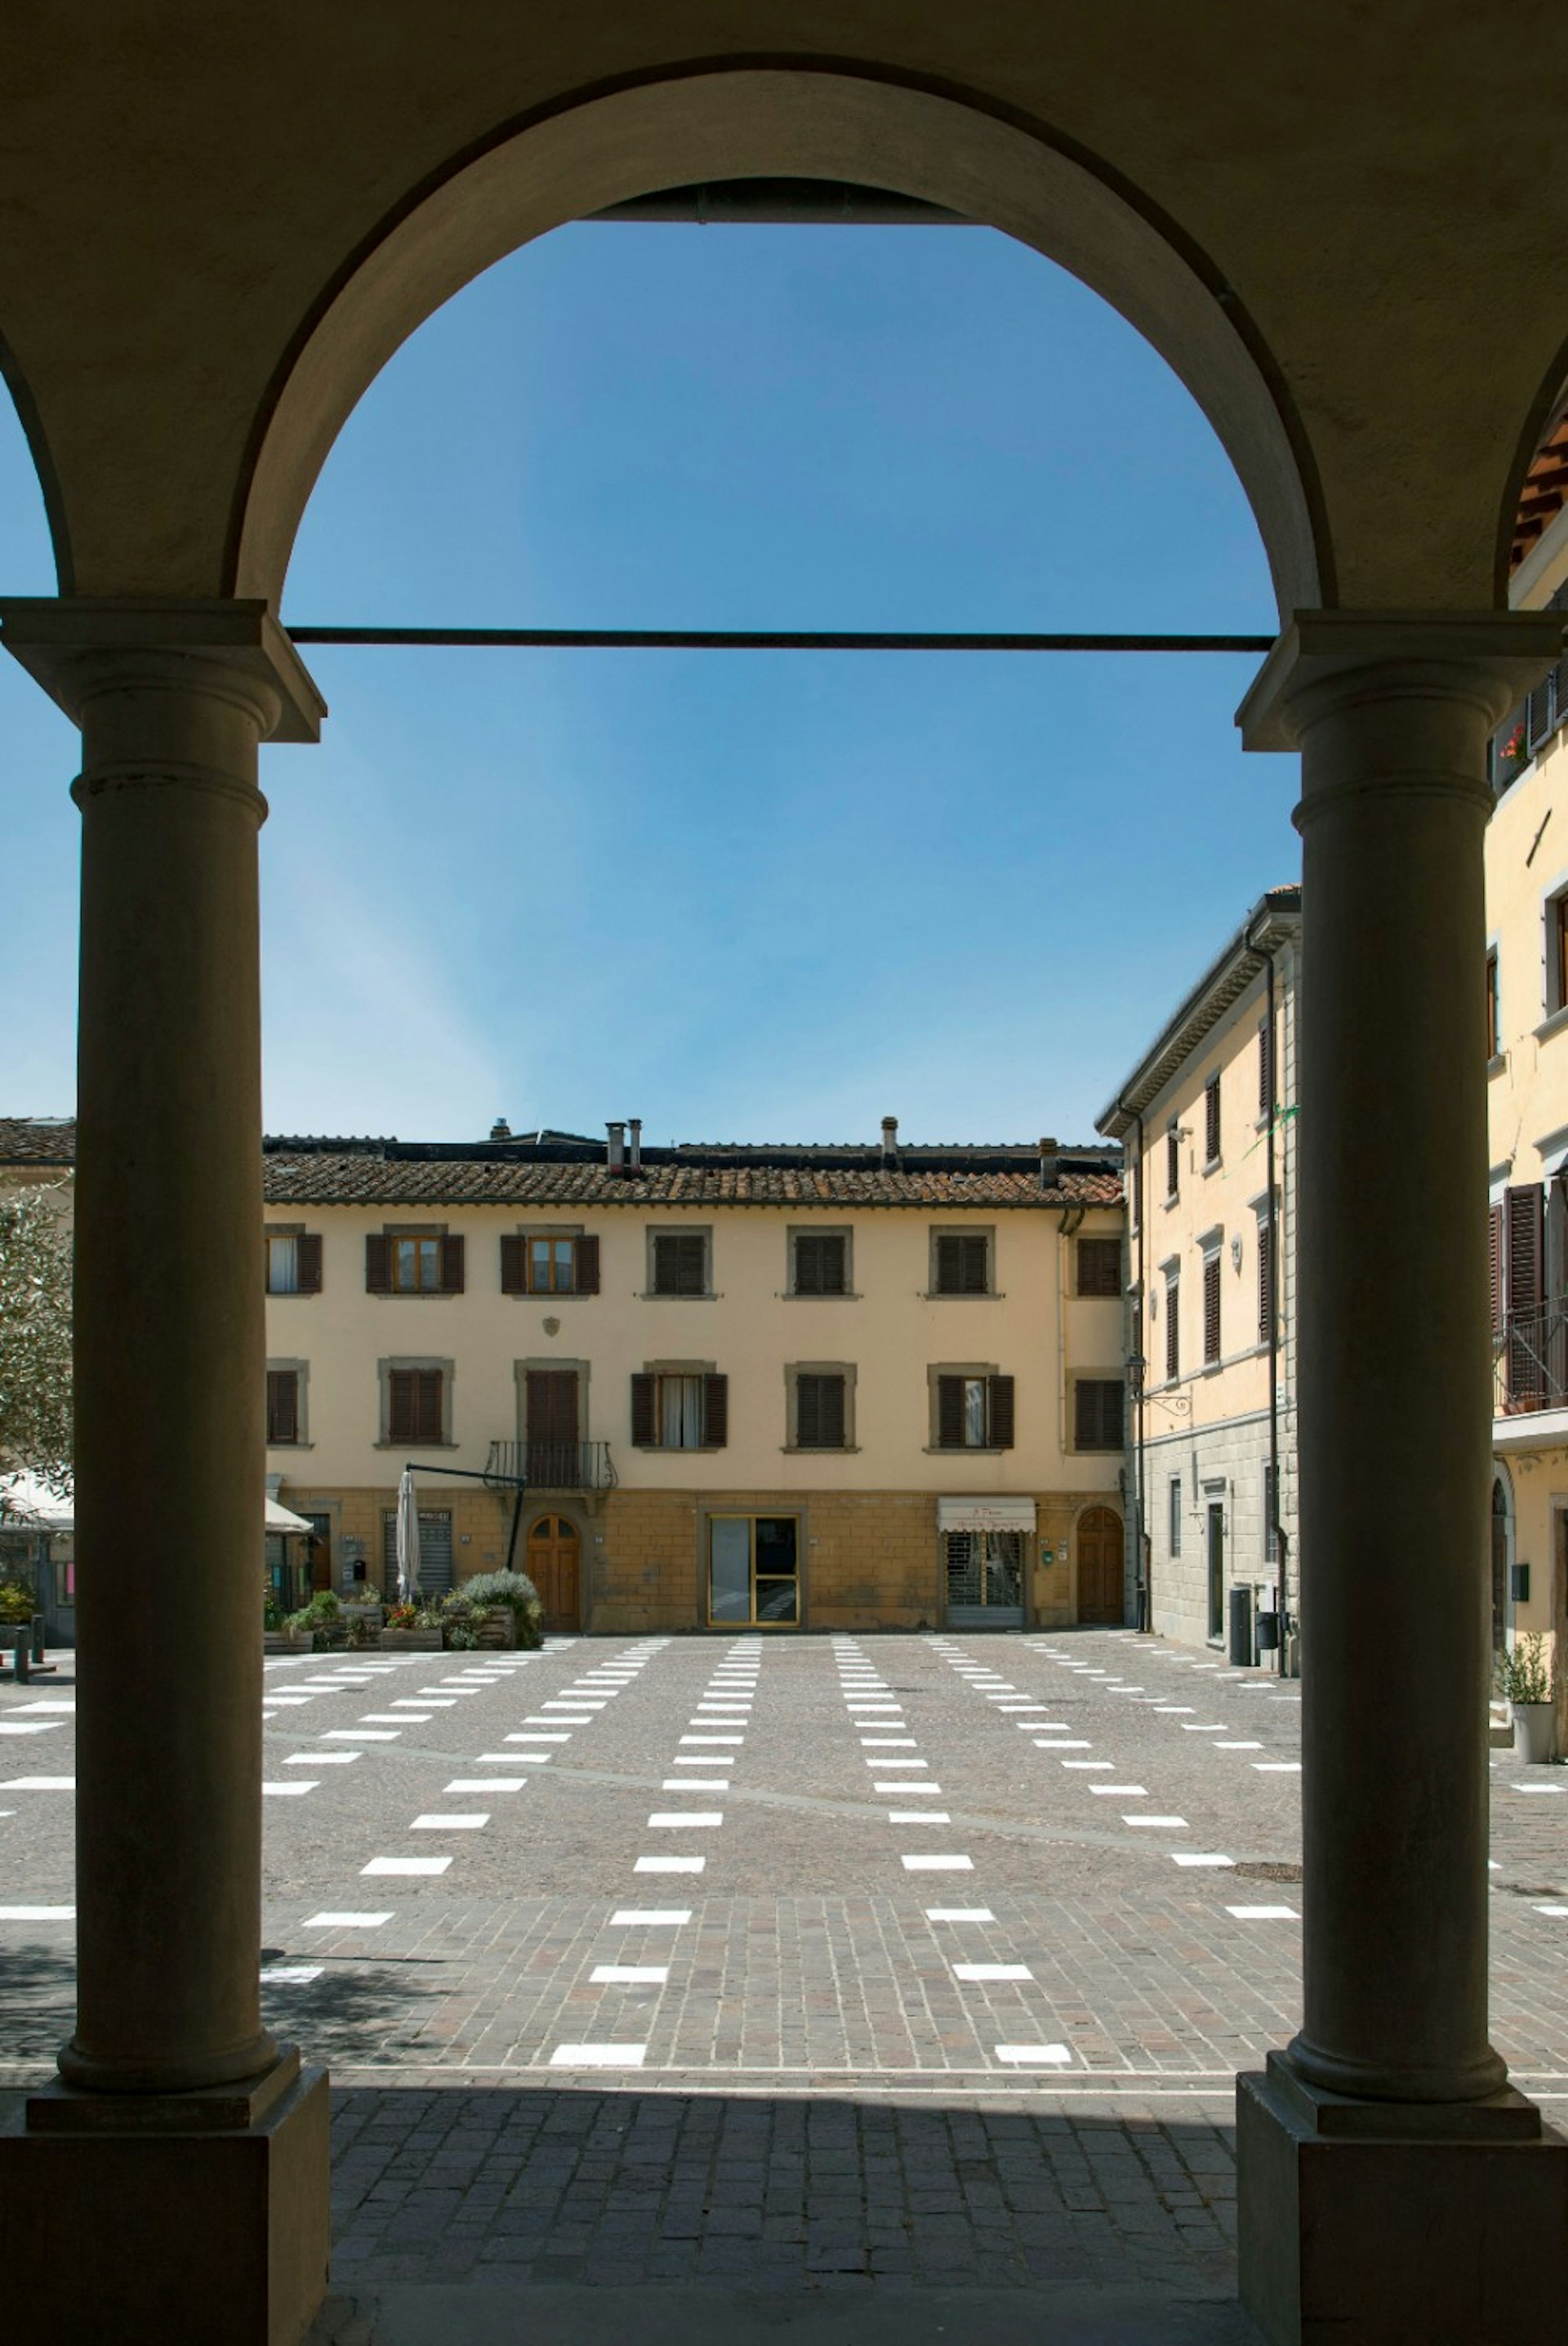 The StoDistante installation located on Piazza Giotto in the town of Vicchio in Italy